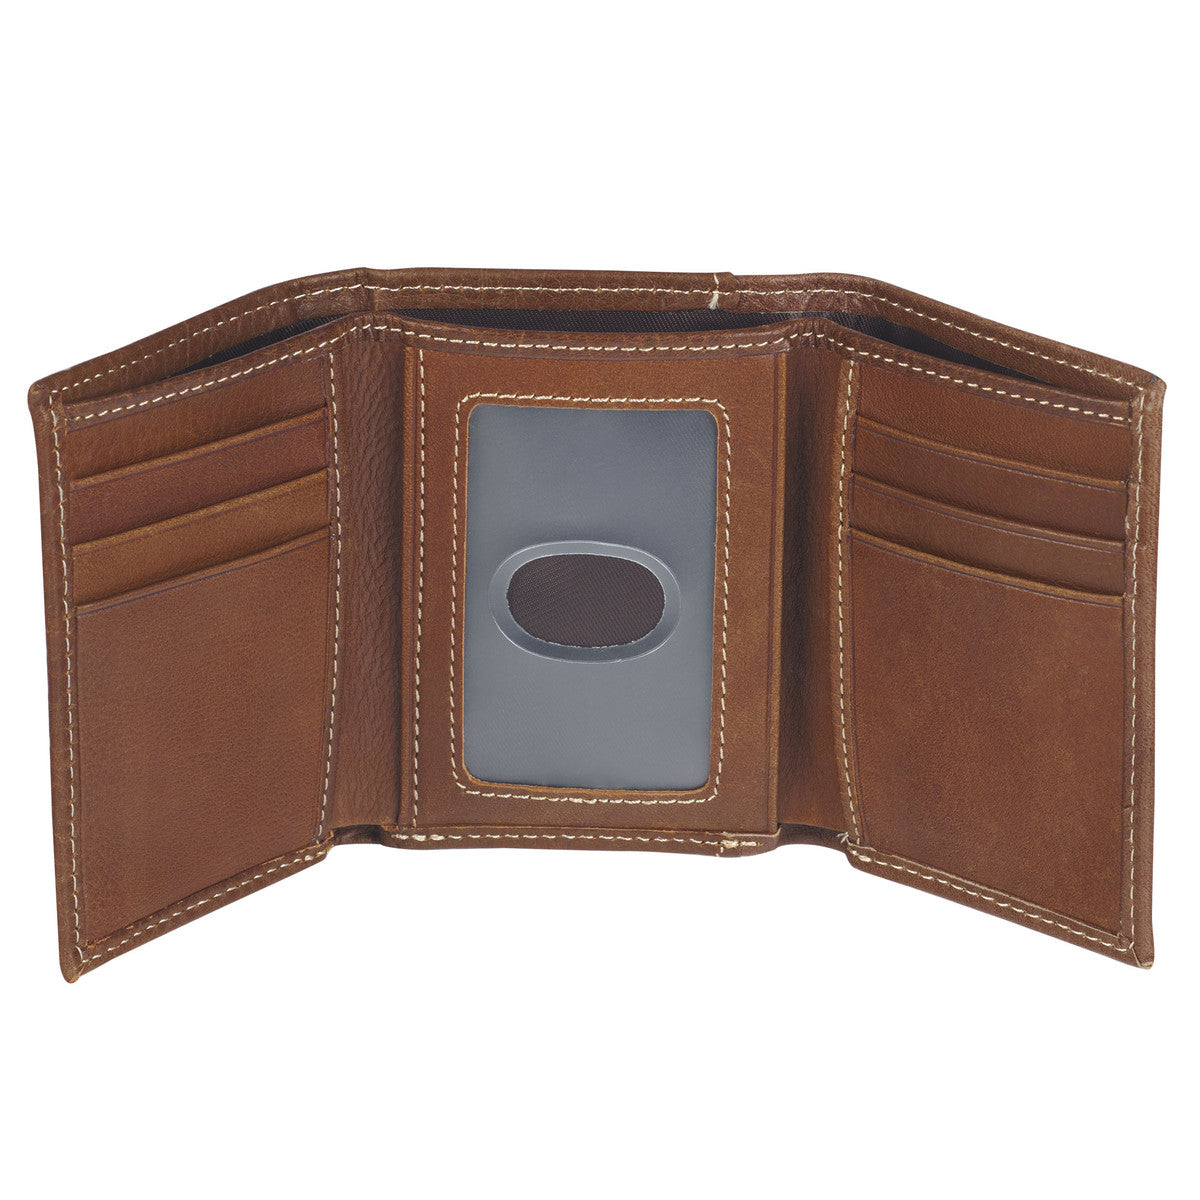 LEATHER WALLET ICHTHUS BADGE BROWN